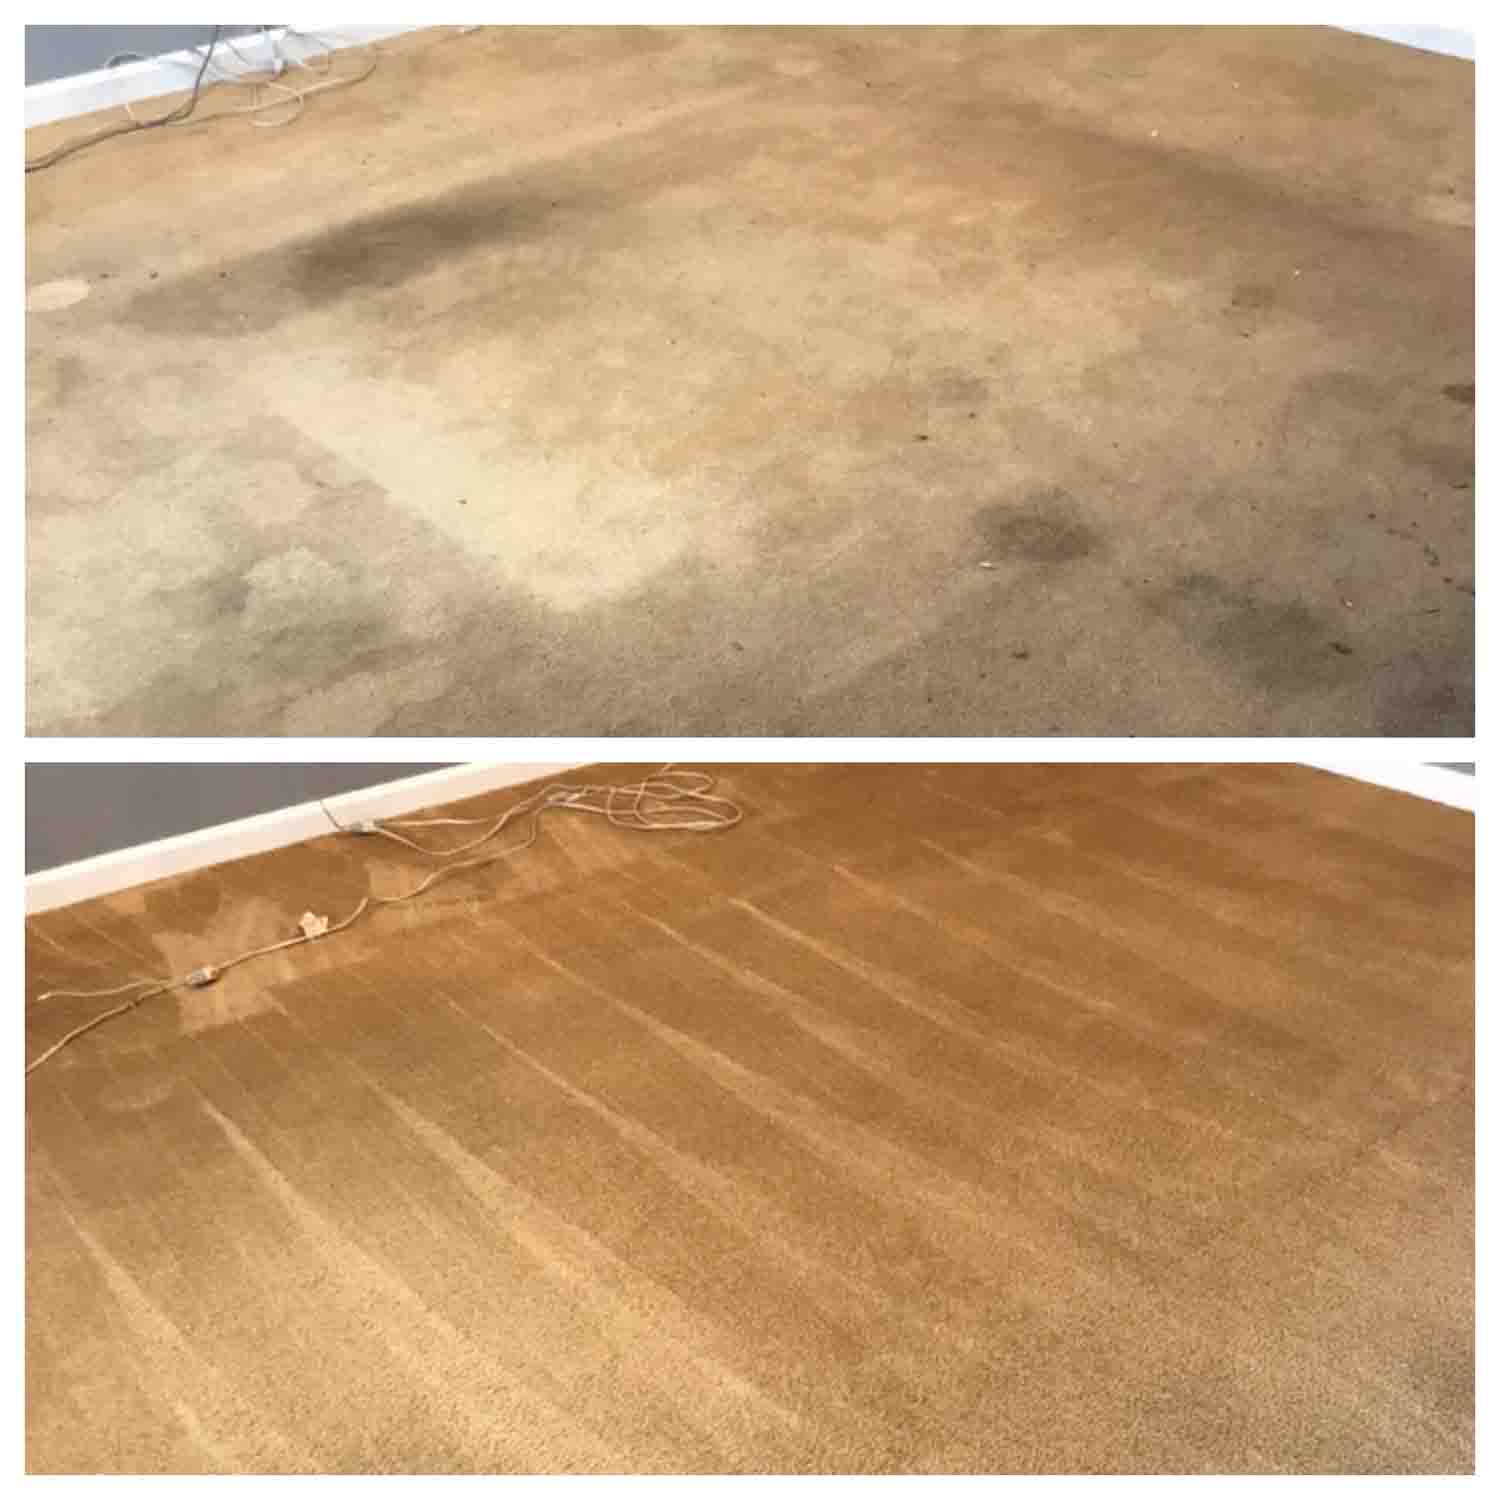 Before and after carpet cleaning — Carpet Cleaning Services in Lexington, KY